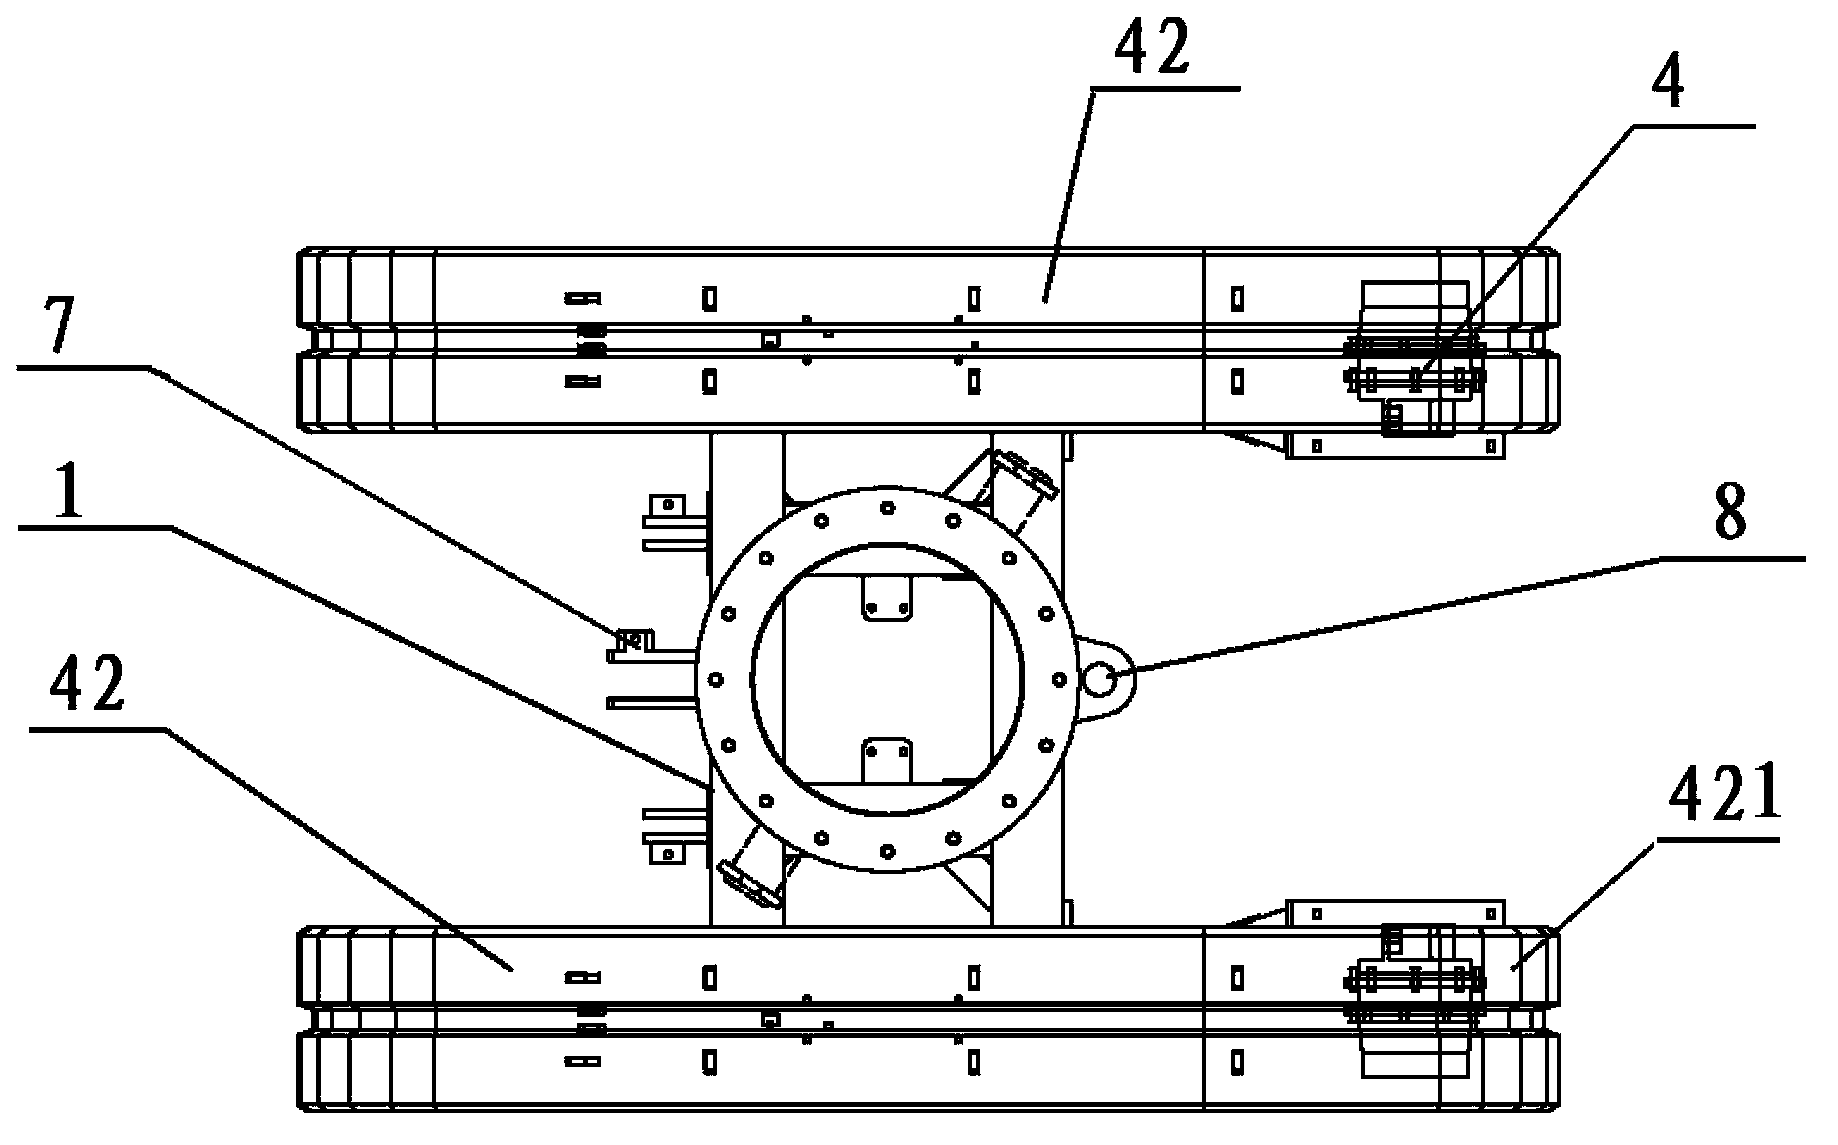 Self-propelled power device and auxiliary mounting system for crane